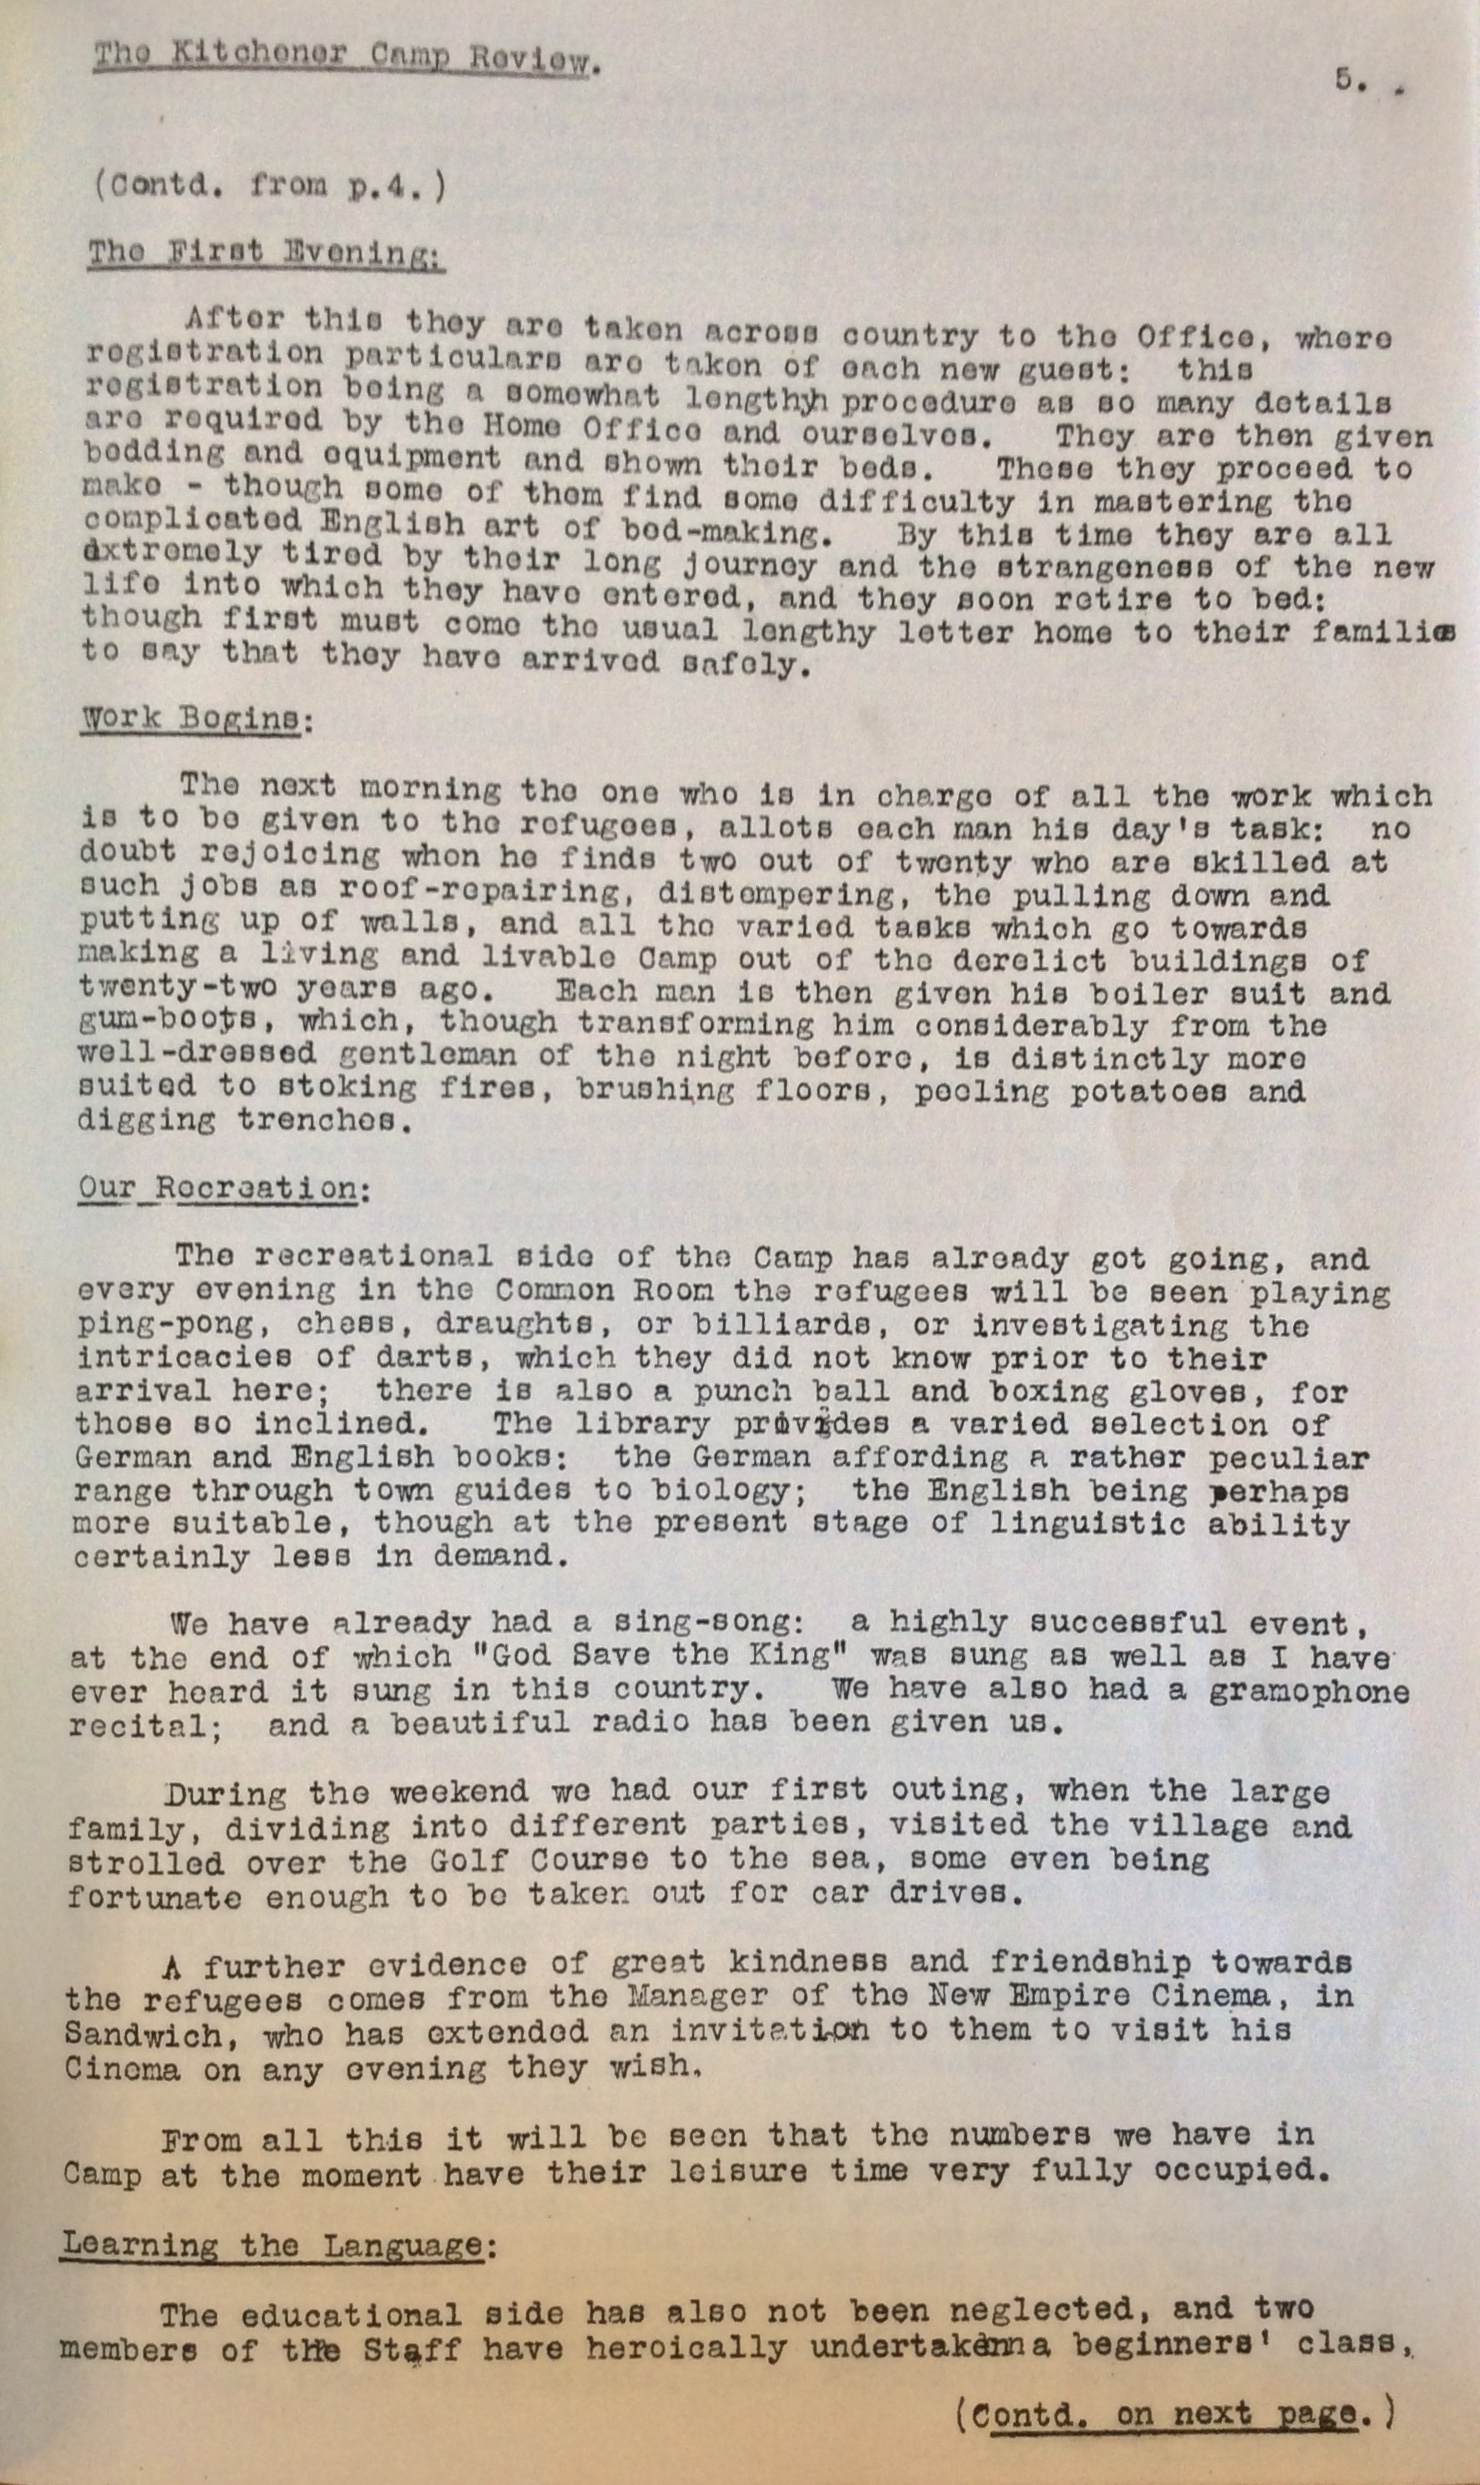 Kitchener Camp Review, No. 1, March 1939, page 5